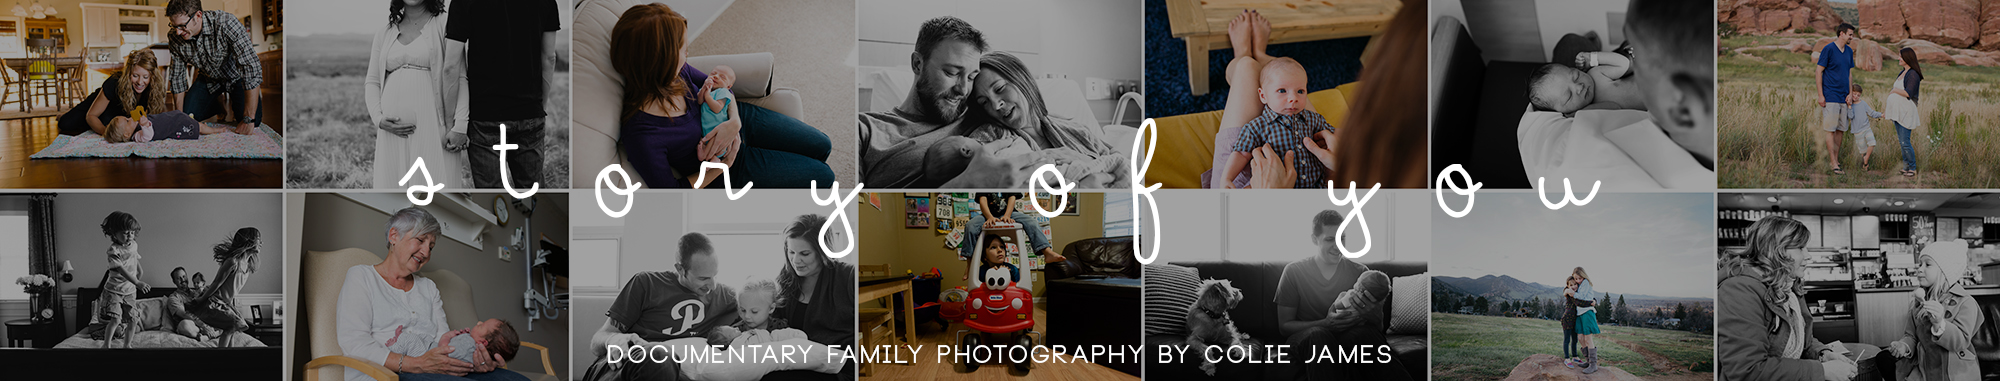 documentary family photographer colie james story of you